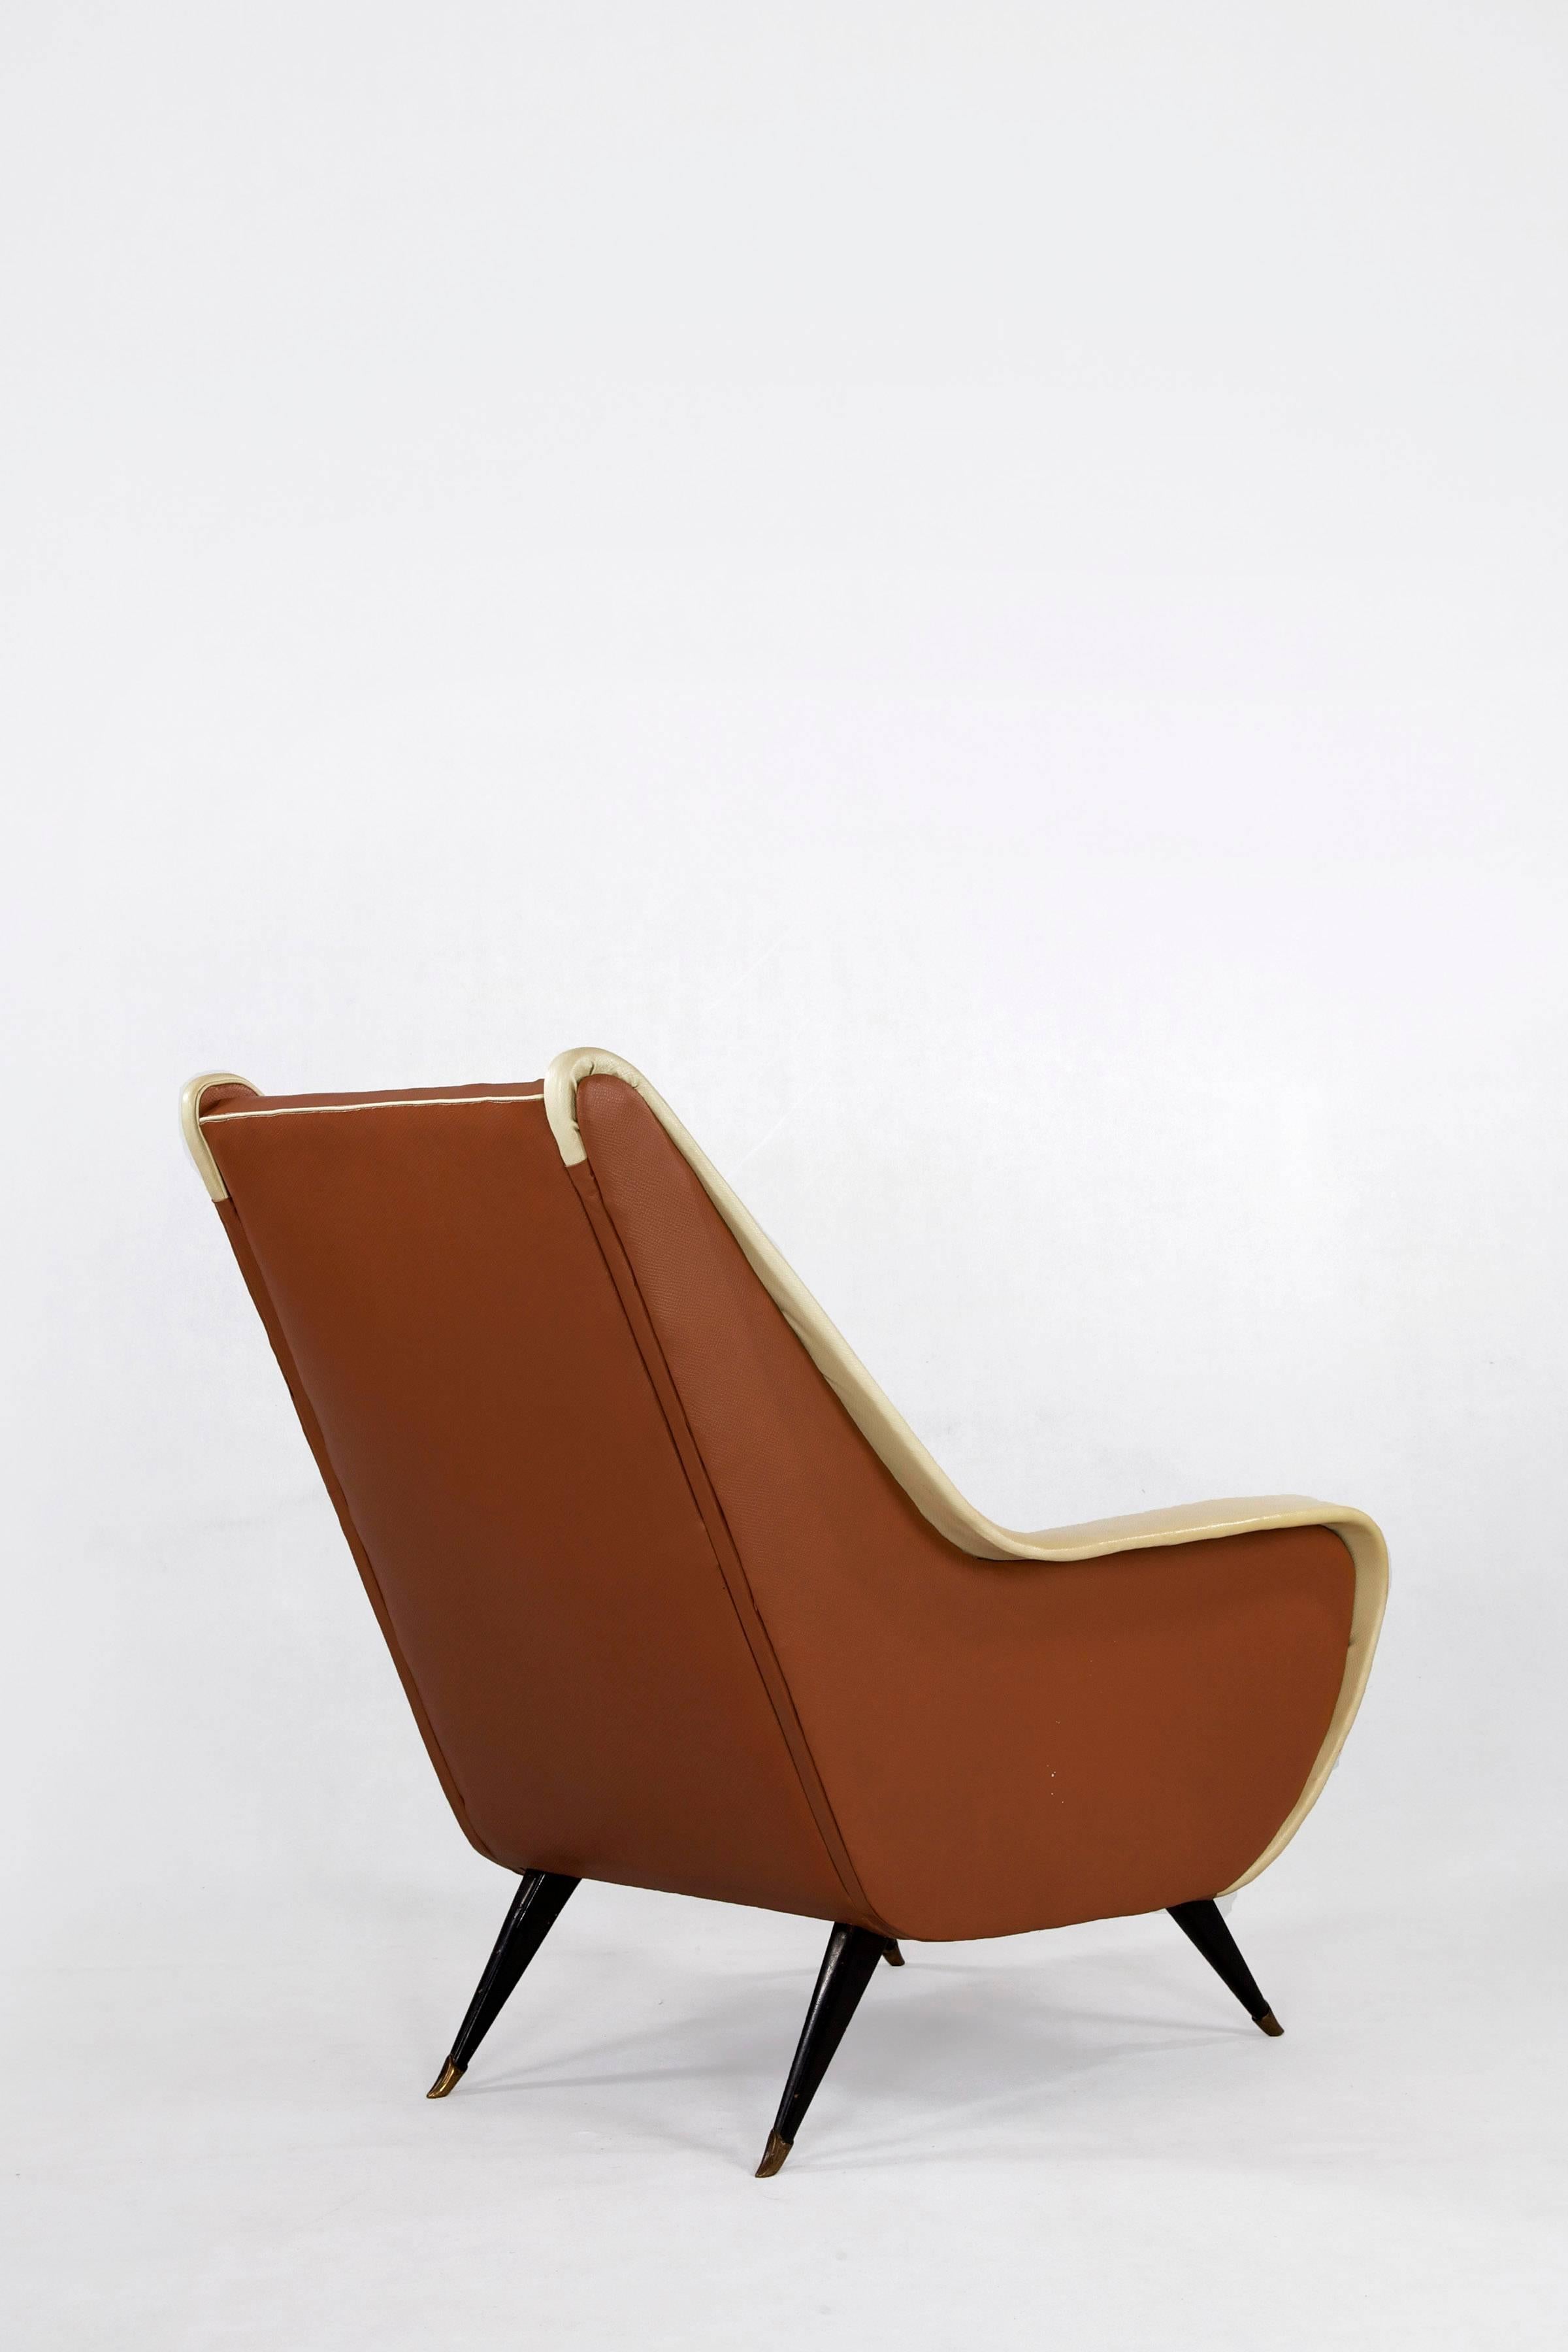 Mid-20th Century Italian Chair in Two-Tone Look of Brown and Beige Faux Leather, 1950